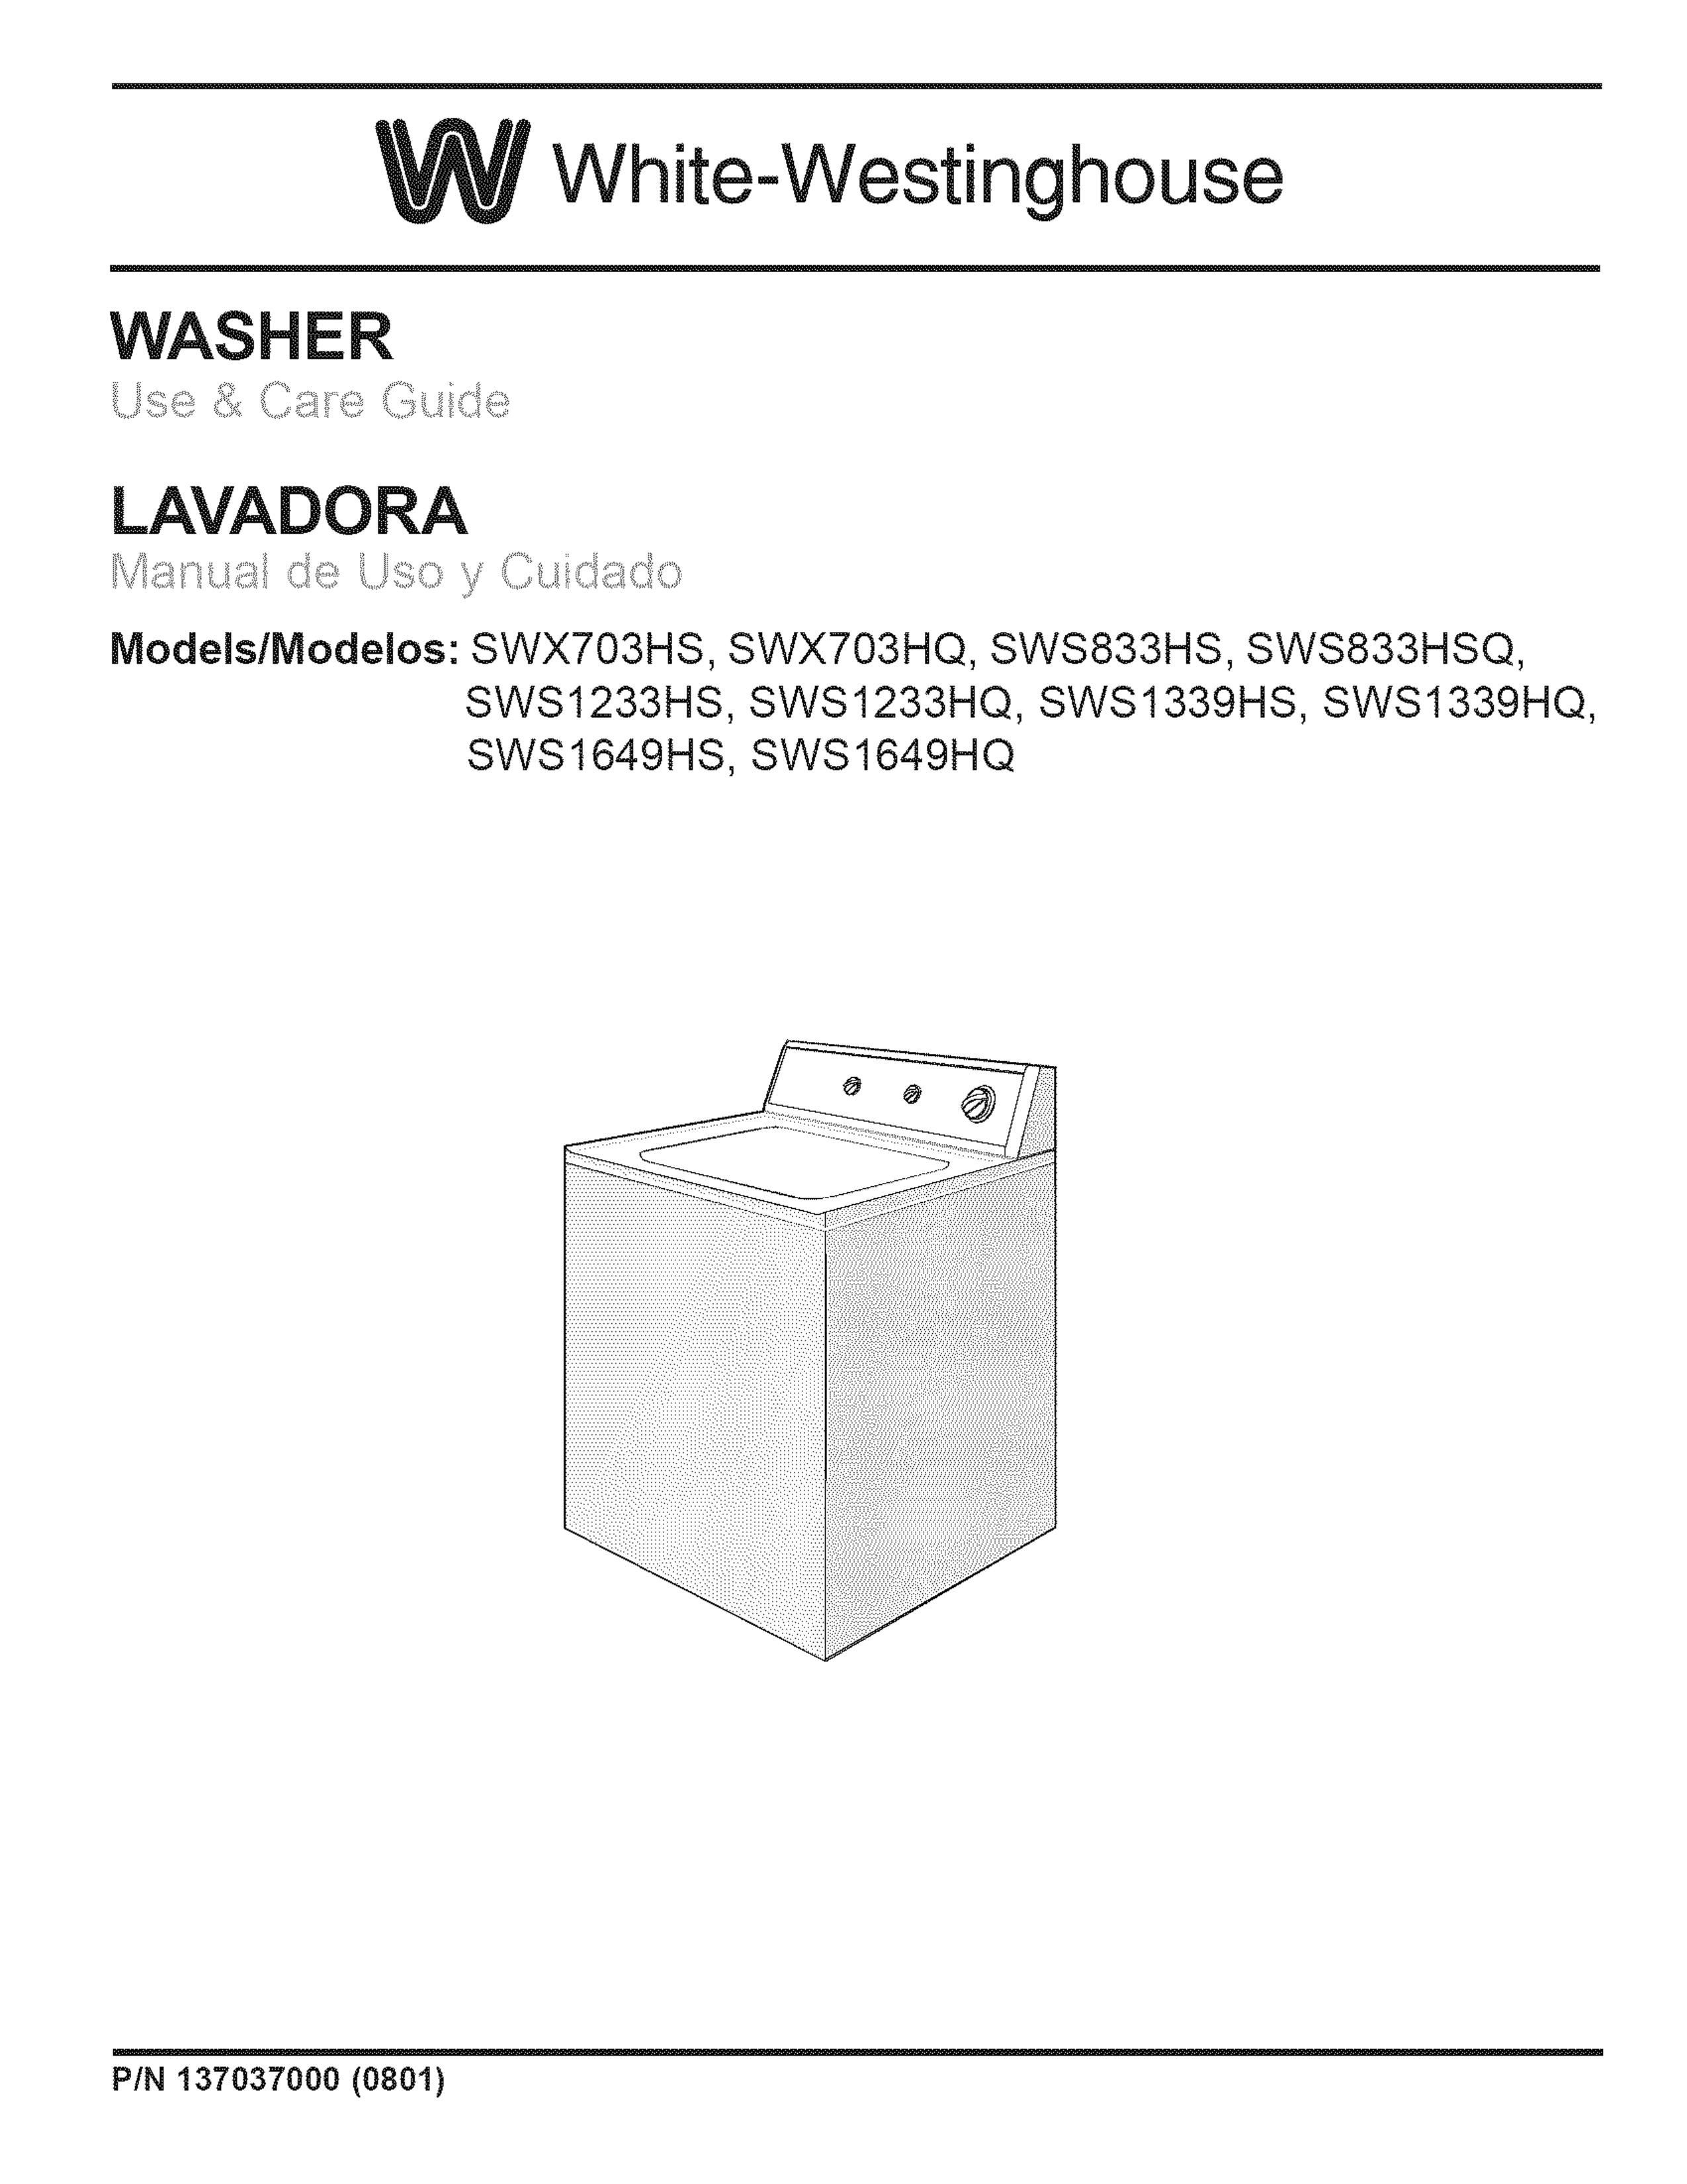 White-Westinghouse SWS1339HQ Washer User Manual